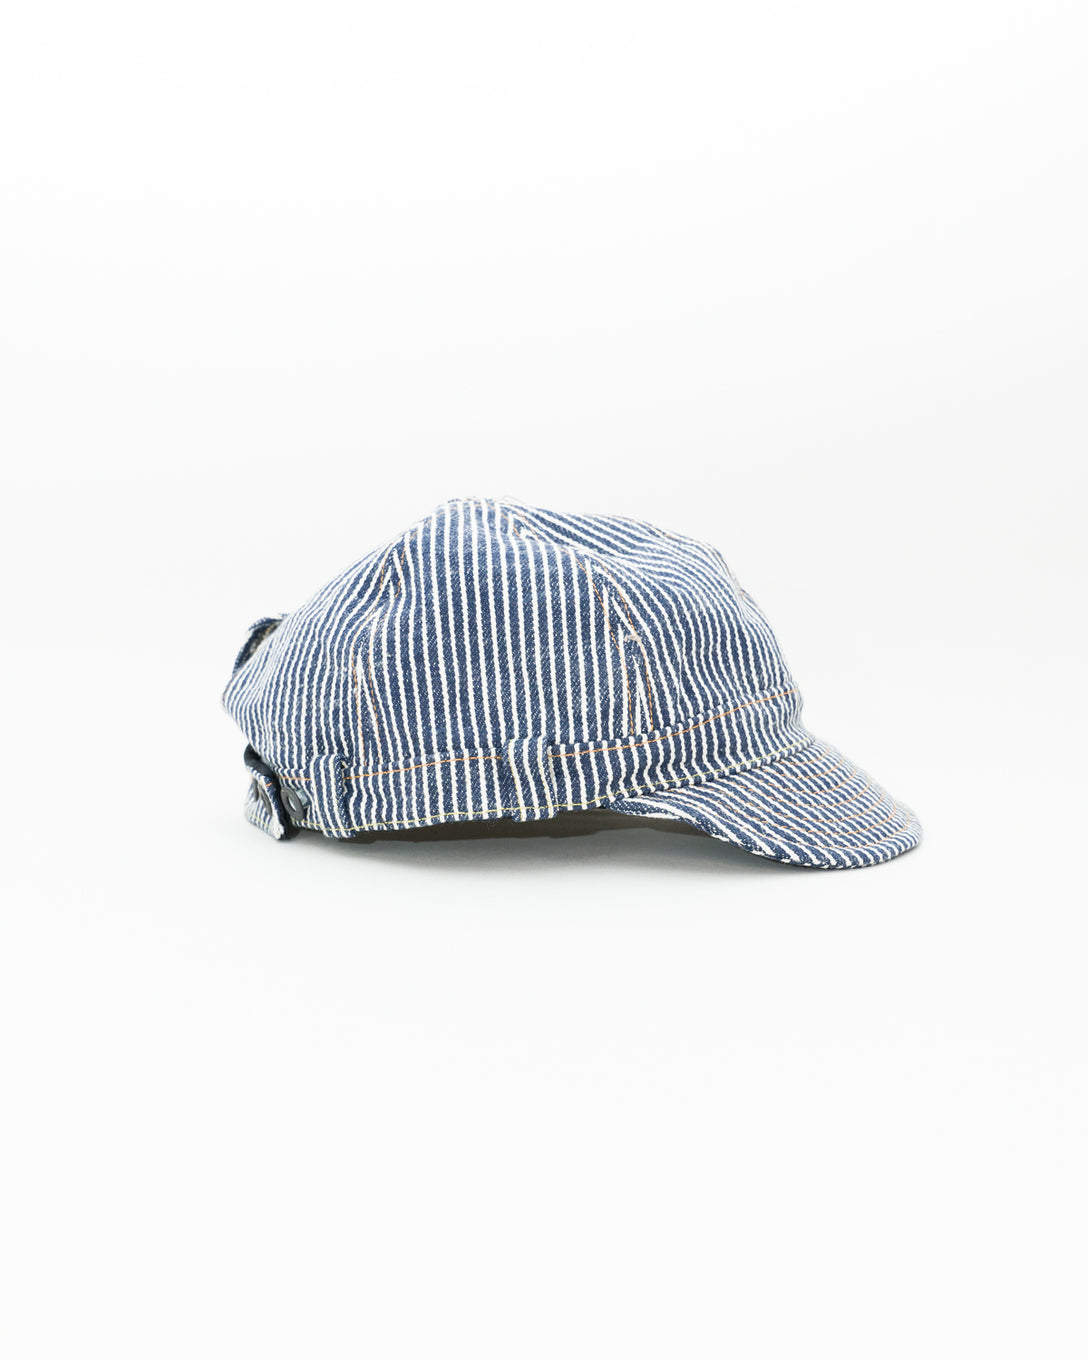 Baseball Cap - Light Blue with white WC